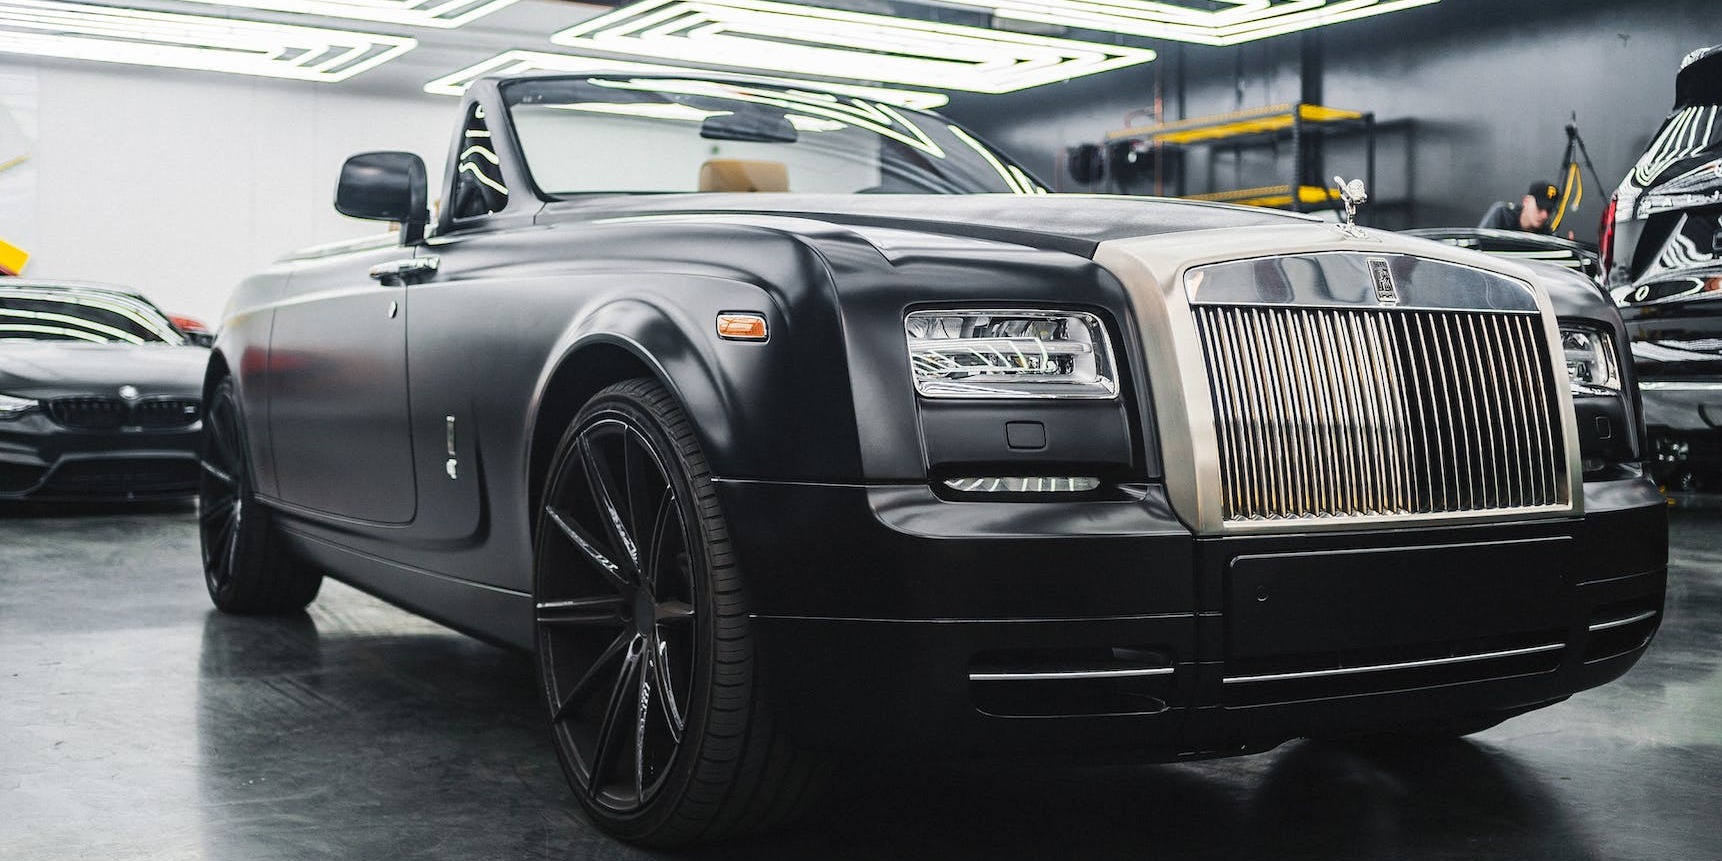 The Ultimate Guide to Maintaining Your Rolls Royce's Value and Performance